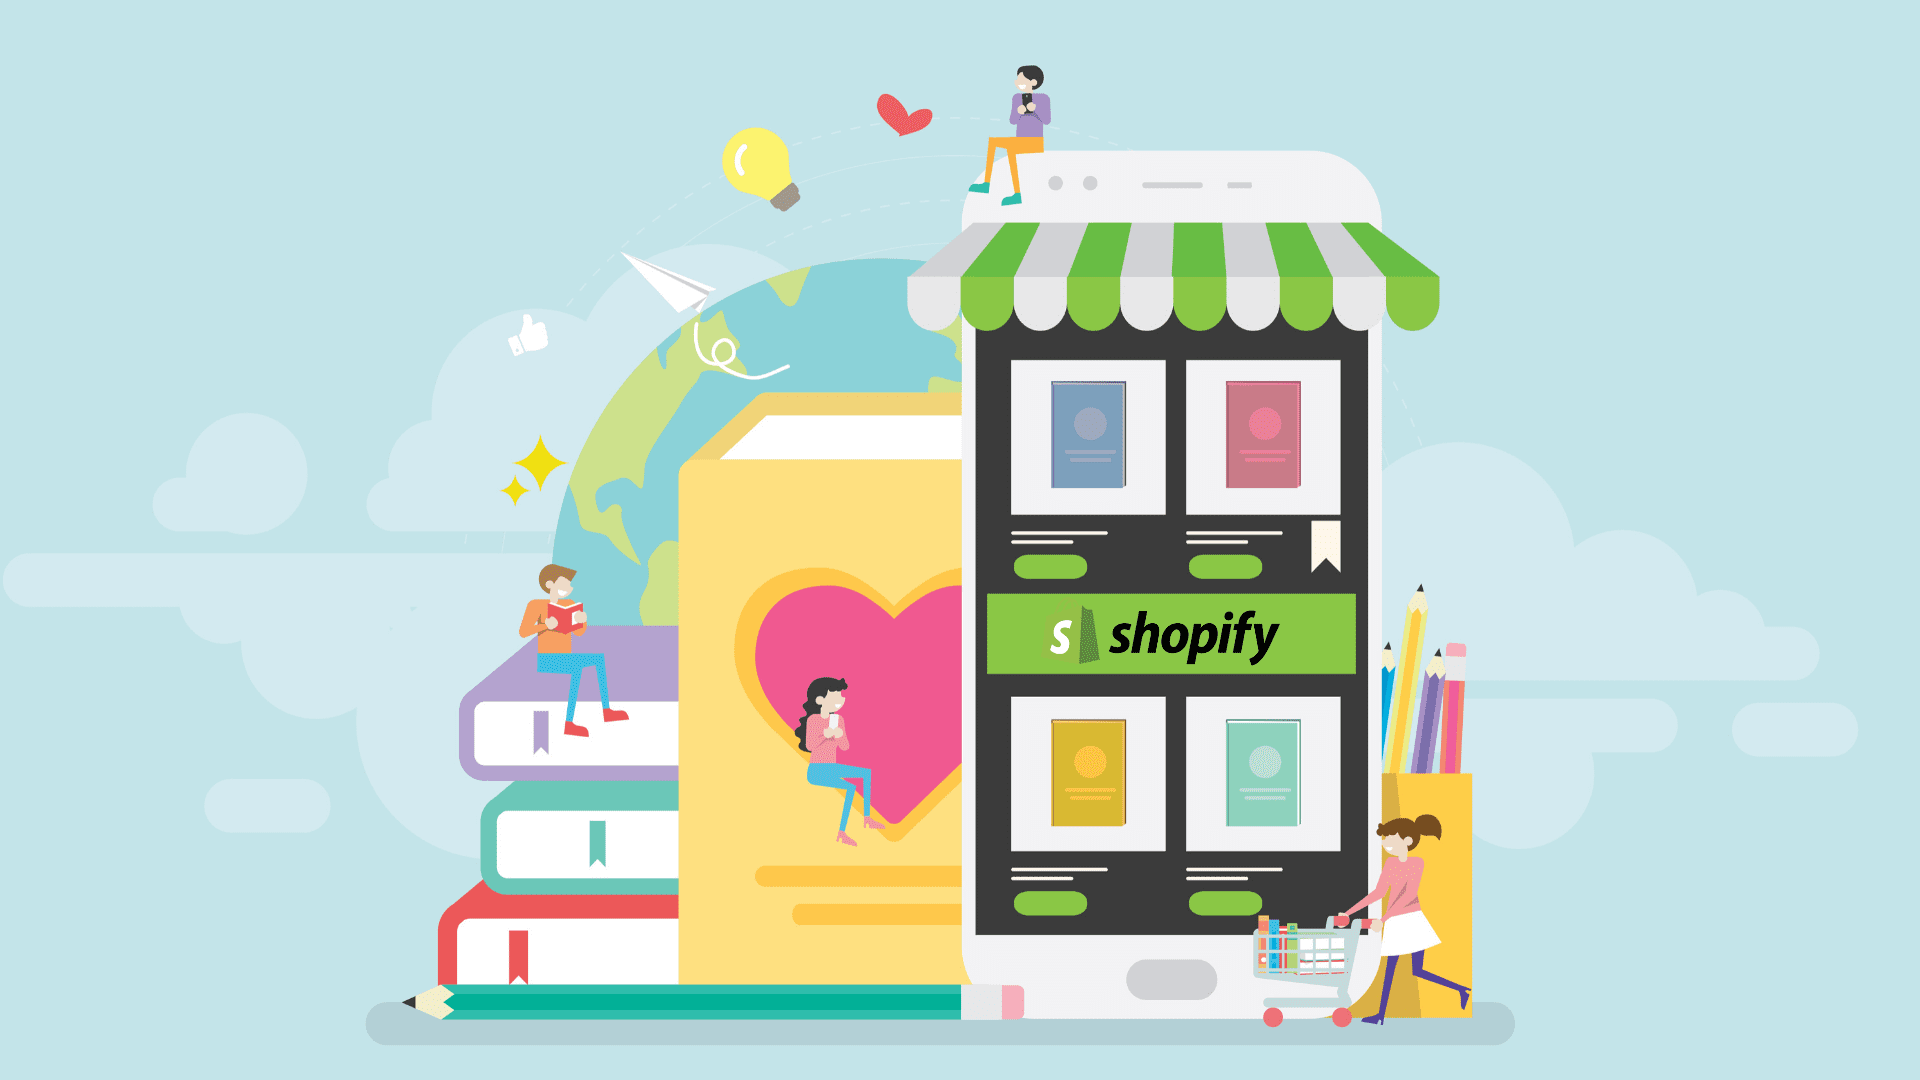 Shopify is easy to maintain